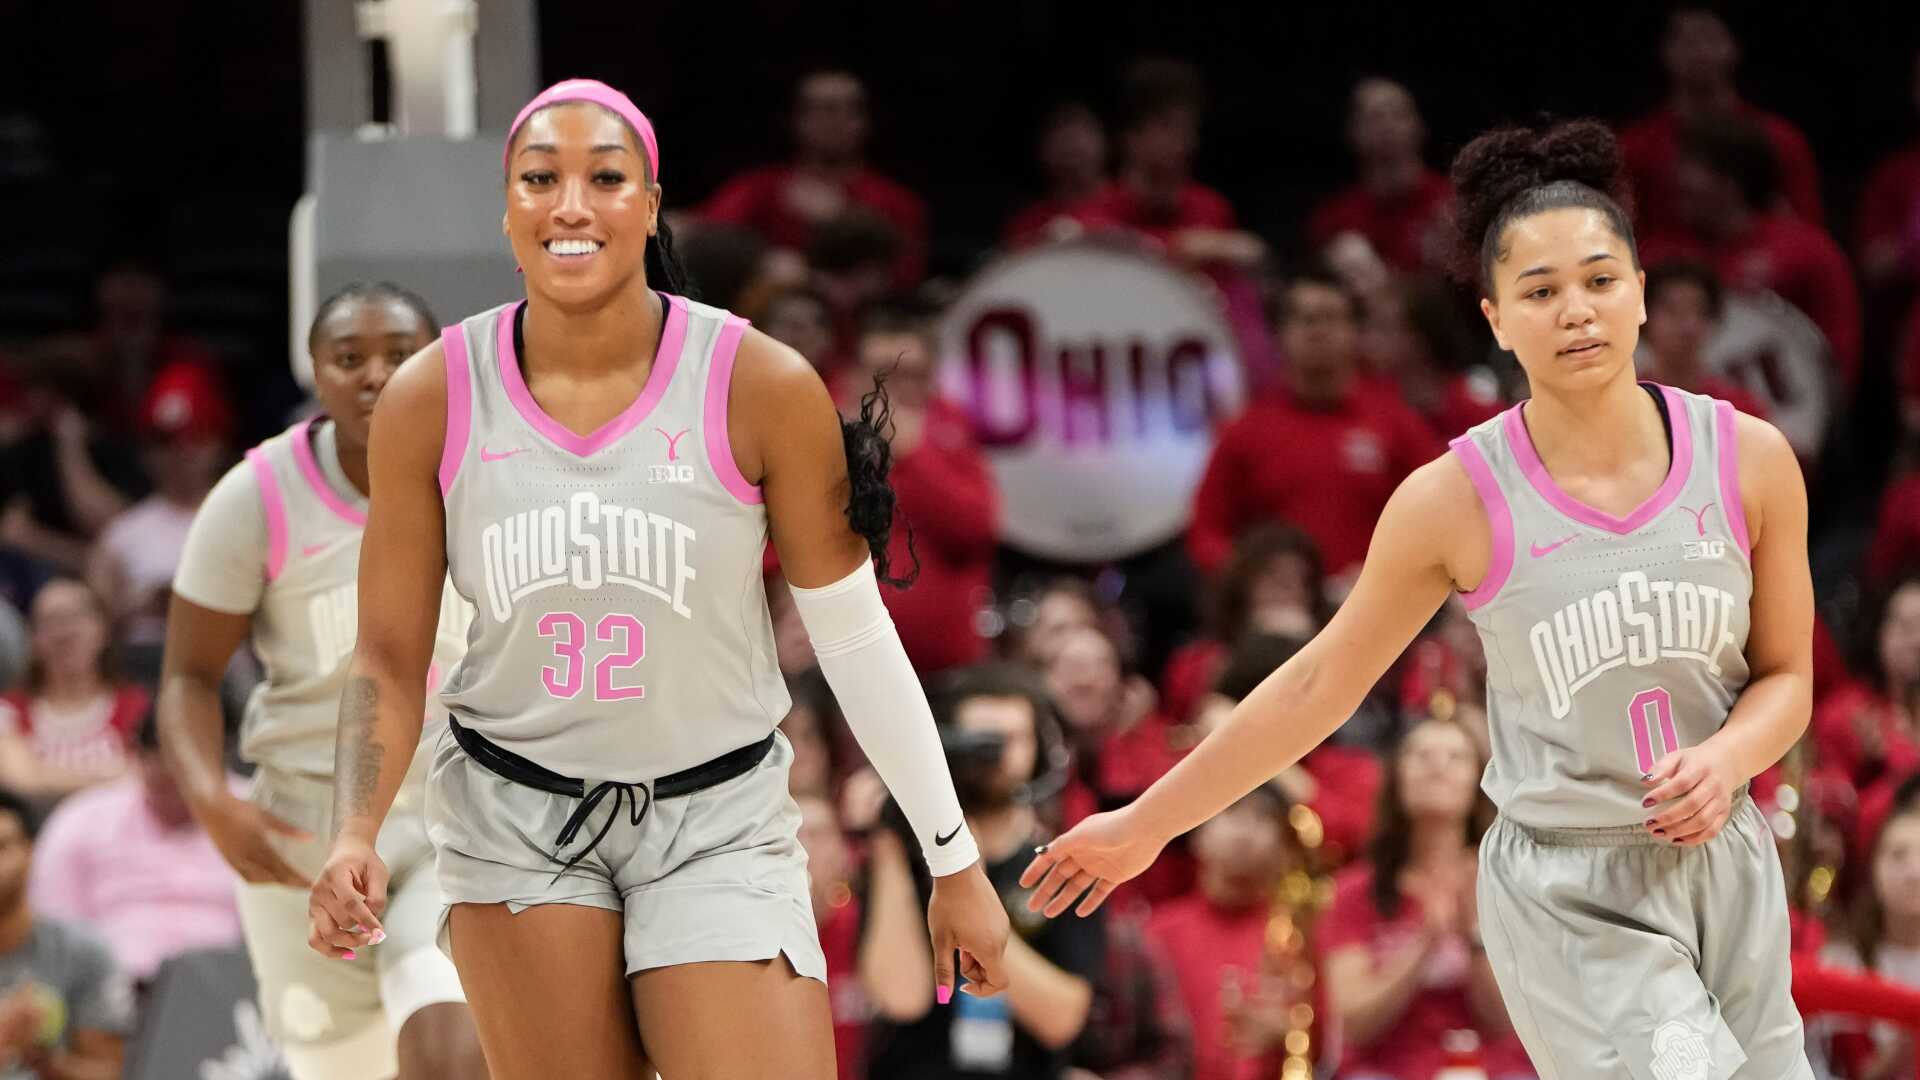 ohio state climbs to no. 2, stanford up to no. 3 behind unbeaten south carolina in women’s ap top 25